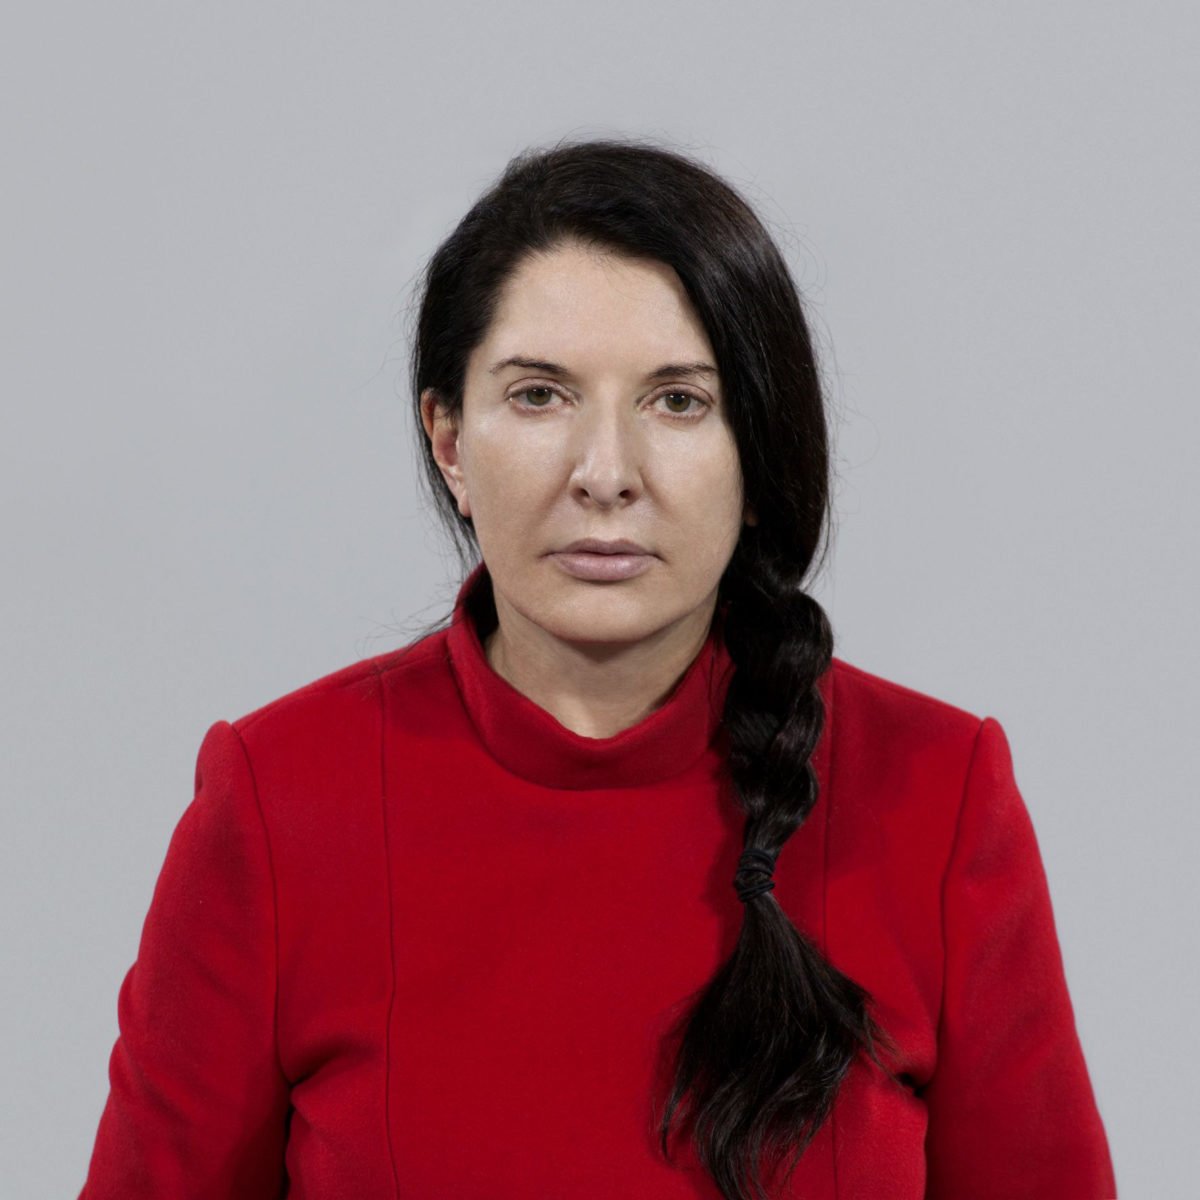 Afgørelse forudsætning Ocean Locking Eyes With Marina Abramovic in 'The Artist Is Present' Inspired This  Author to Write a Novel—Read an Excerpt Here